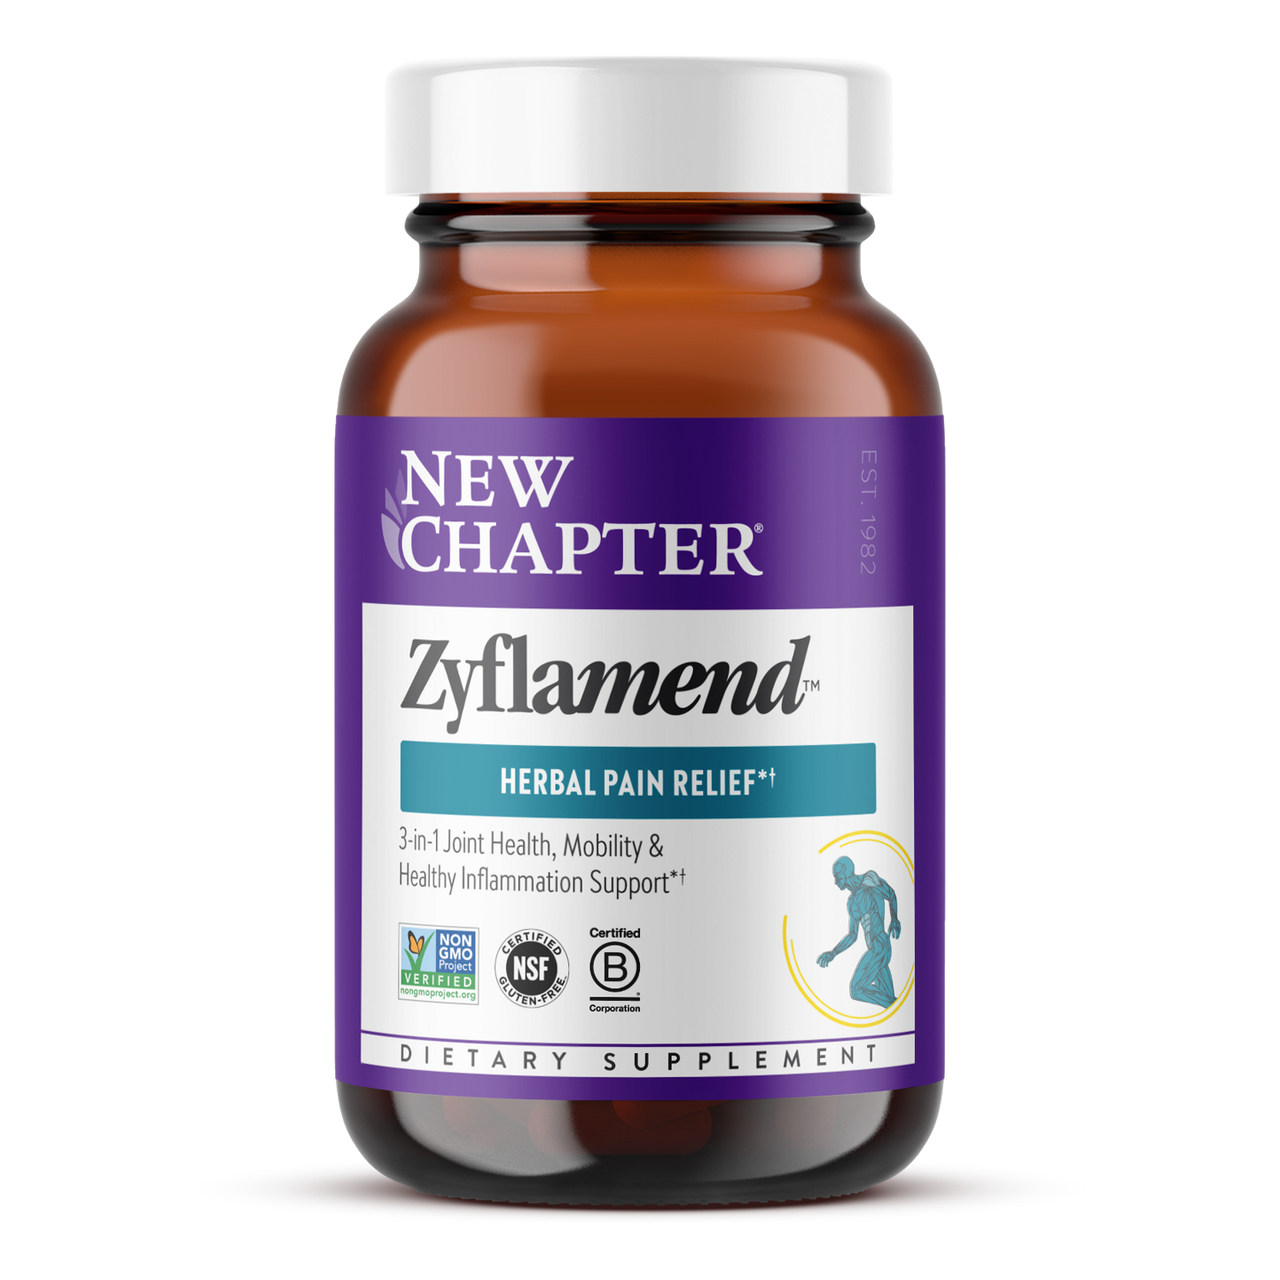 New Chapter Zyflamend Joint Support 10-in-1 Superfood Blend with Ginger & Turmeric for Healthy Inflammation Response & Herbal Pain Relief 120 Vegetarian Capsules